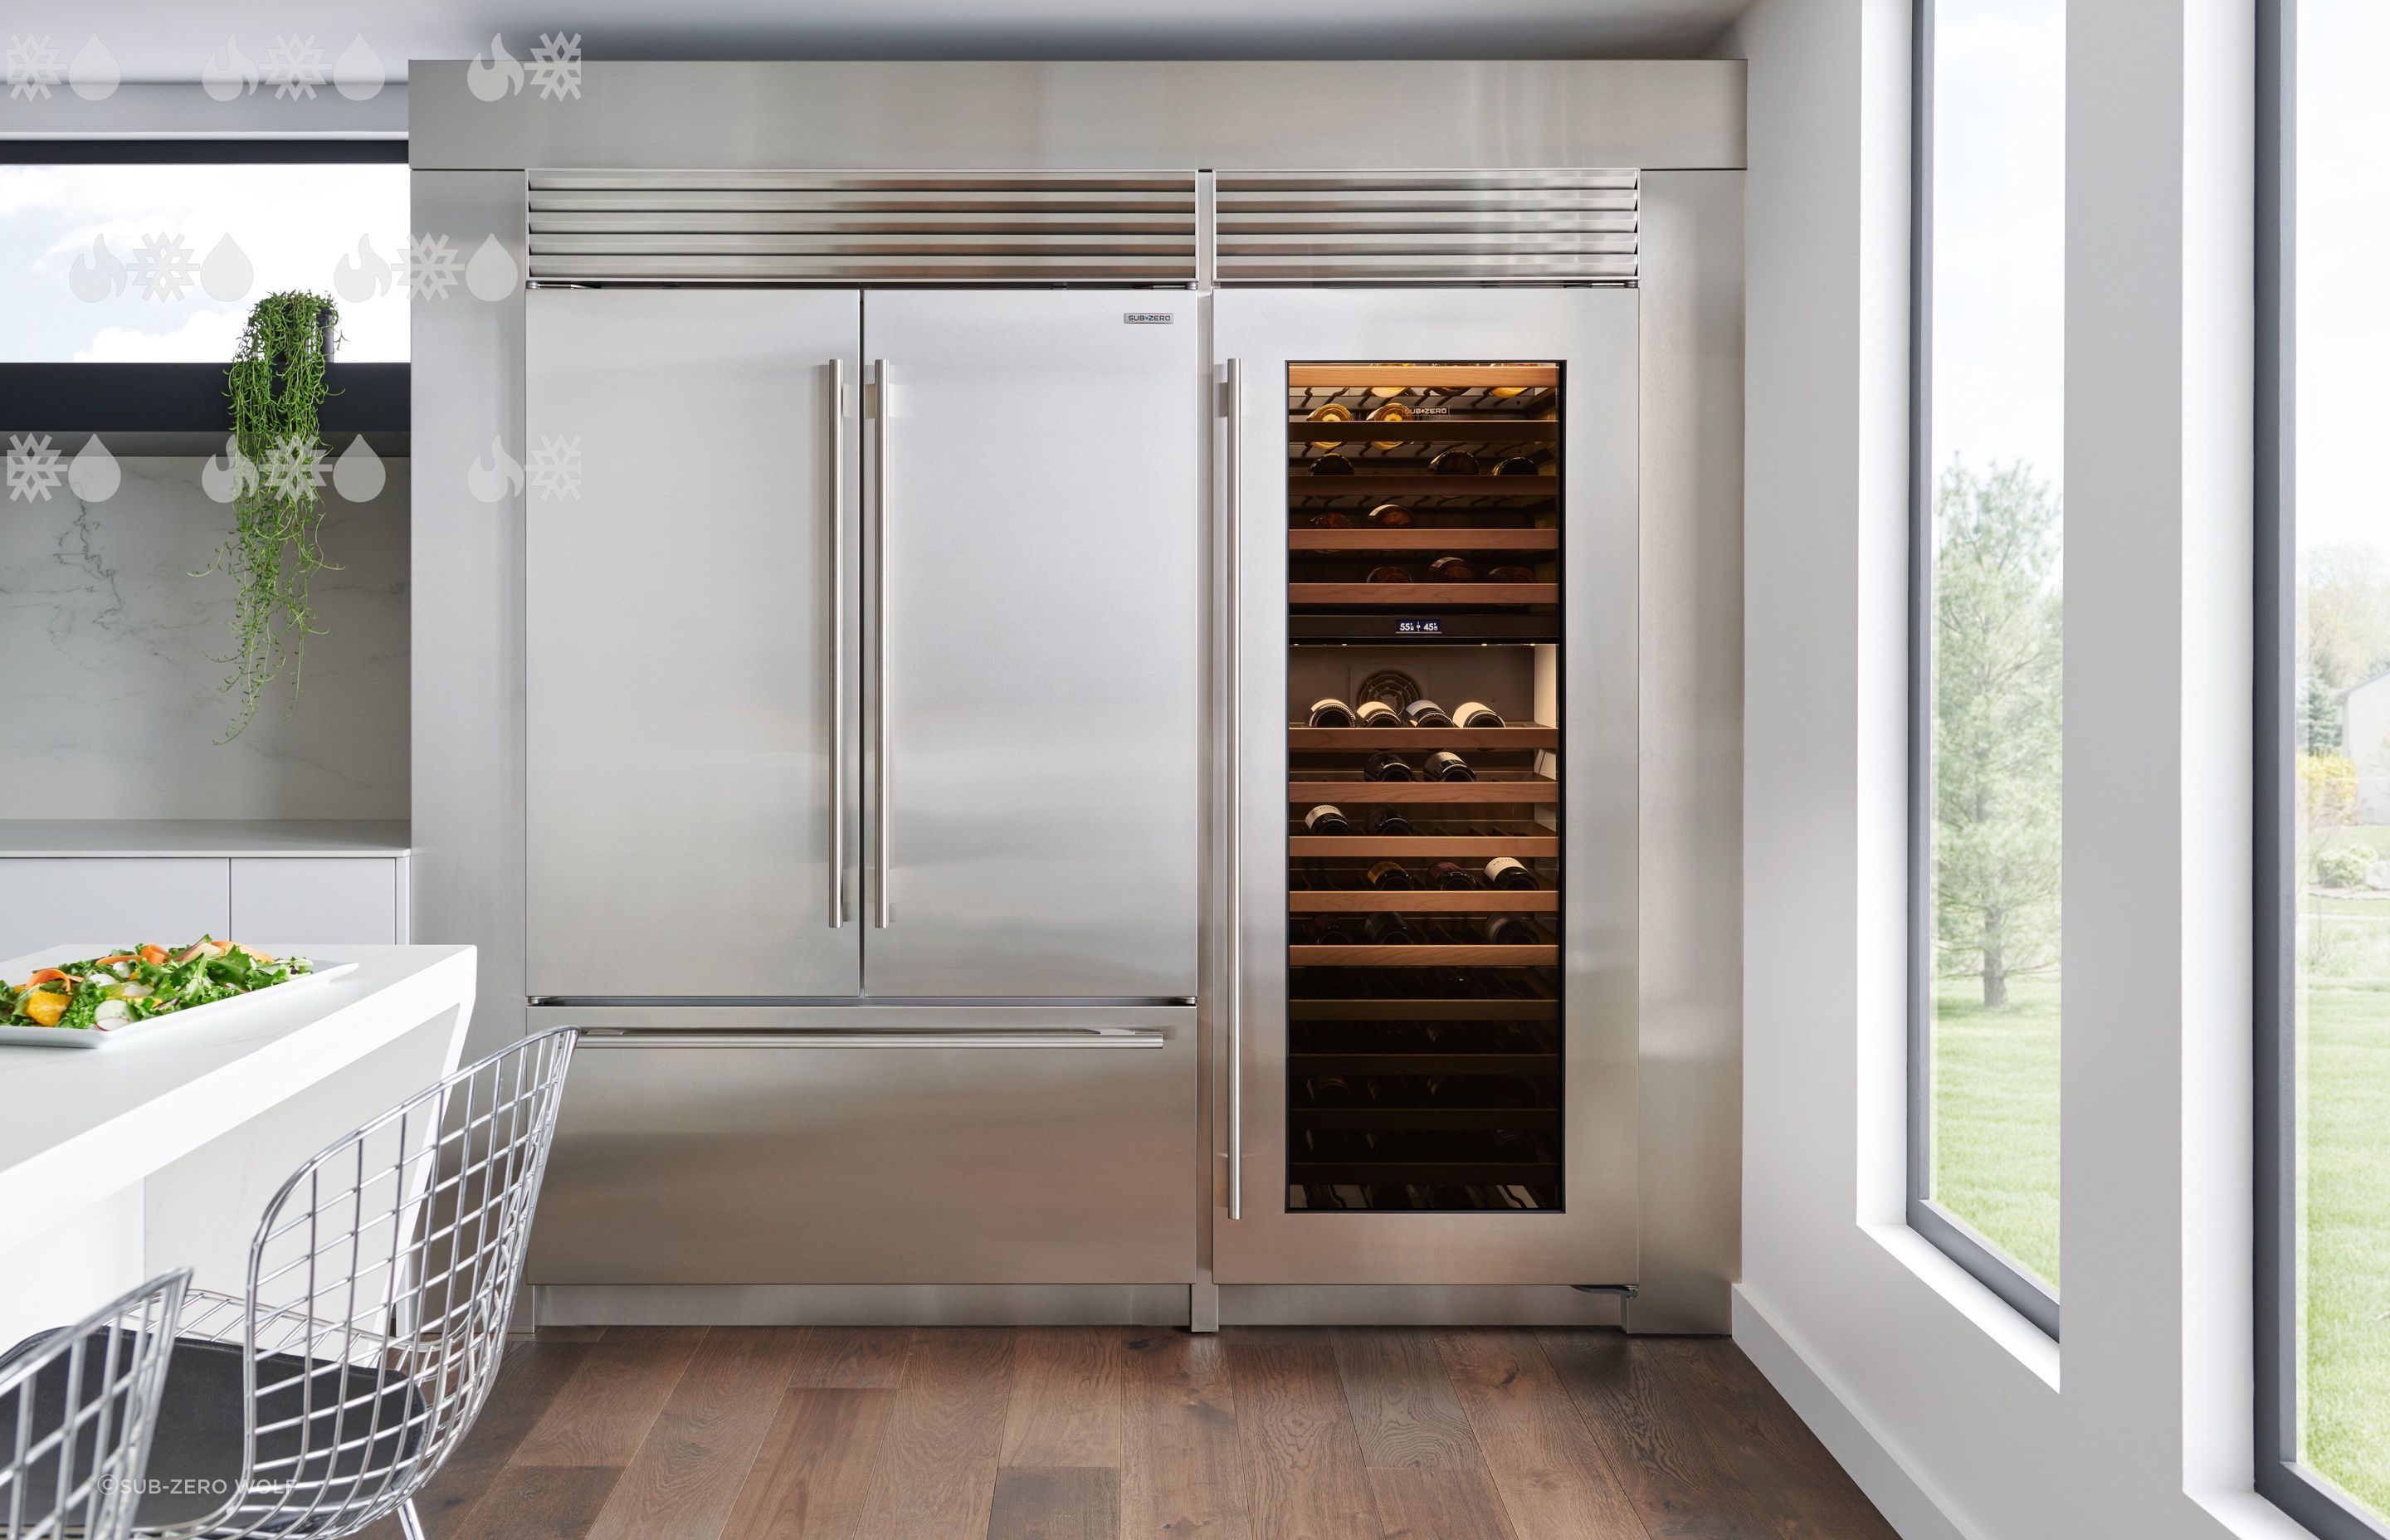 Wine storage that controls temperature, UV, humidity and vibration to preserve the bottles in ideal conditions